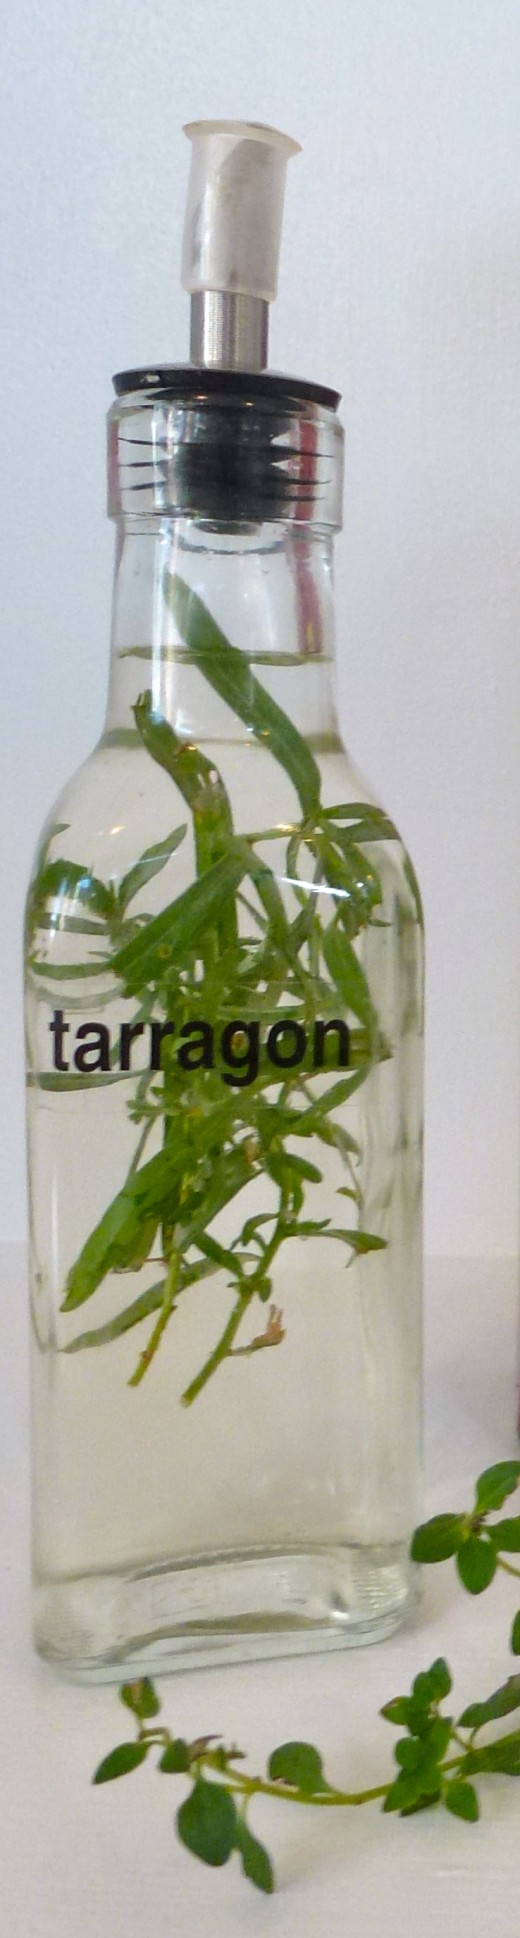 Start with the best wine vinegar you can afford. Your "secret" recipe tarragon vinegar will receive rave reviews.